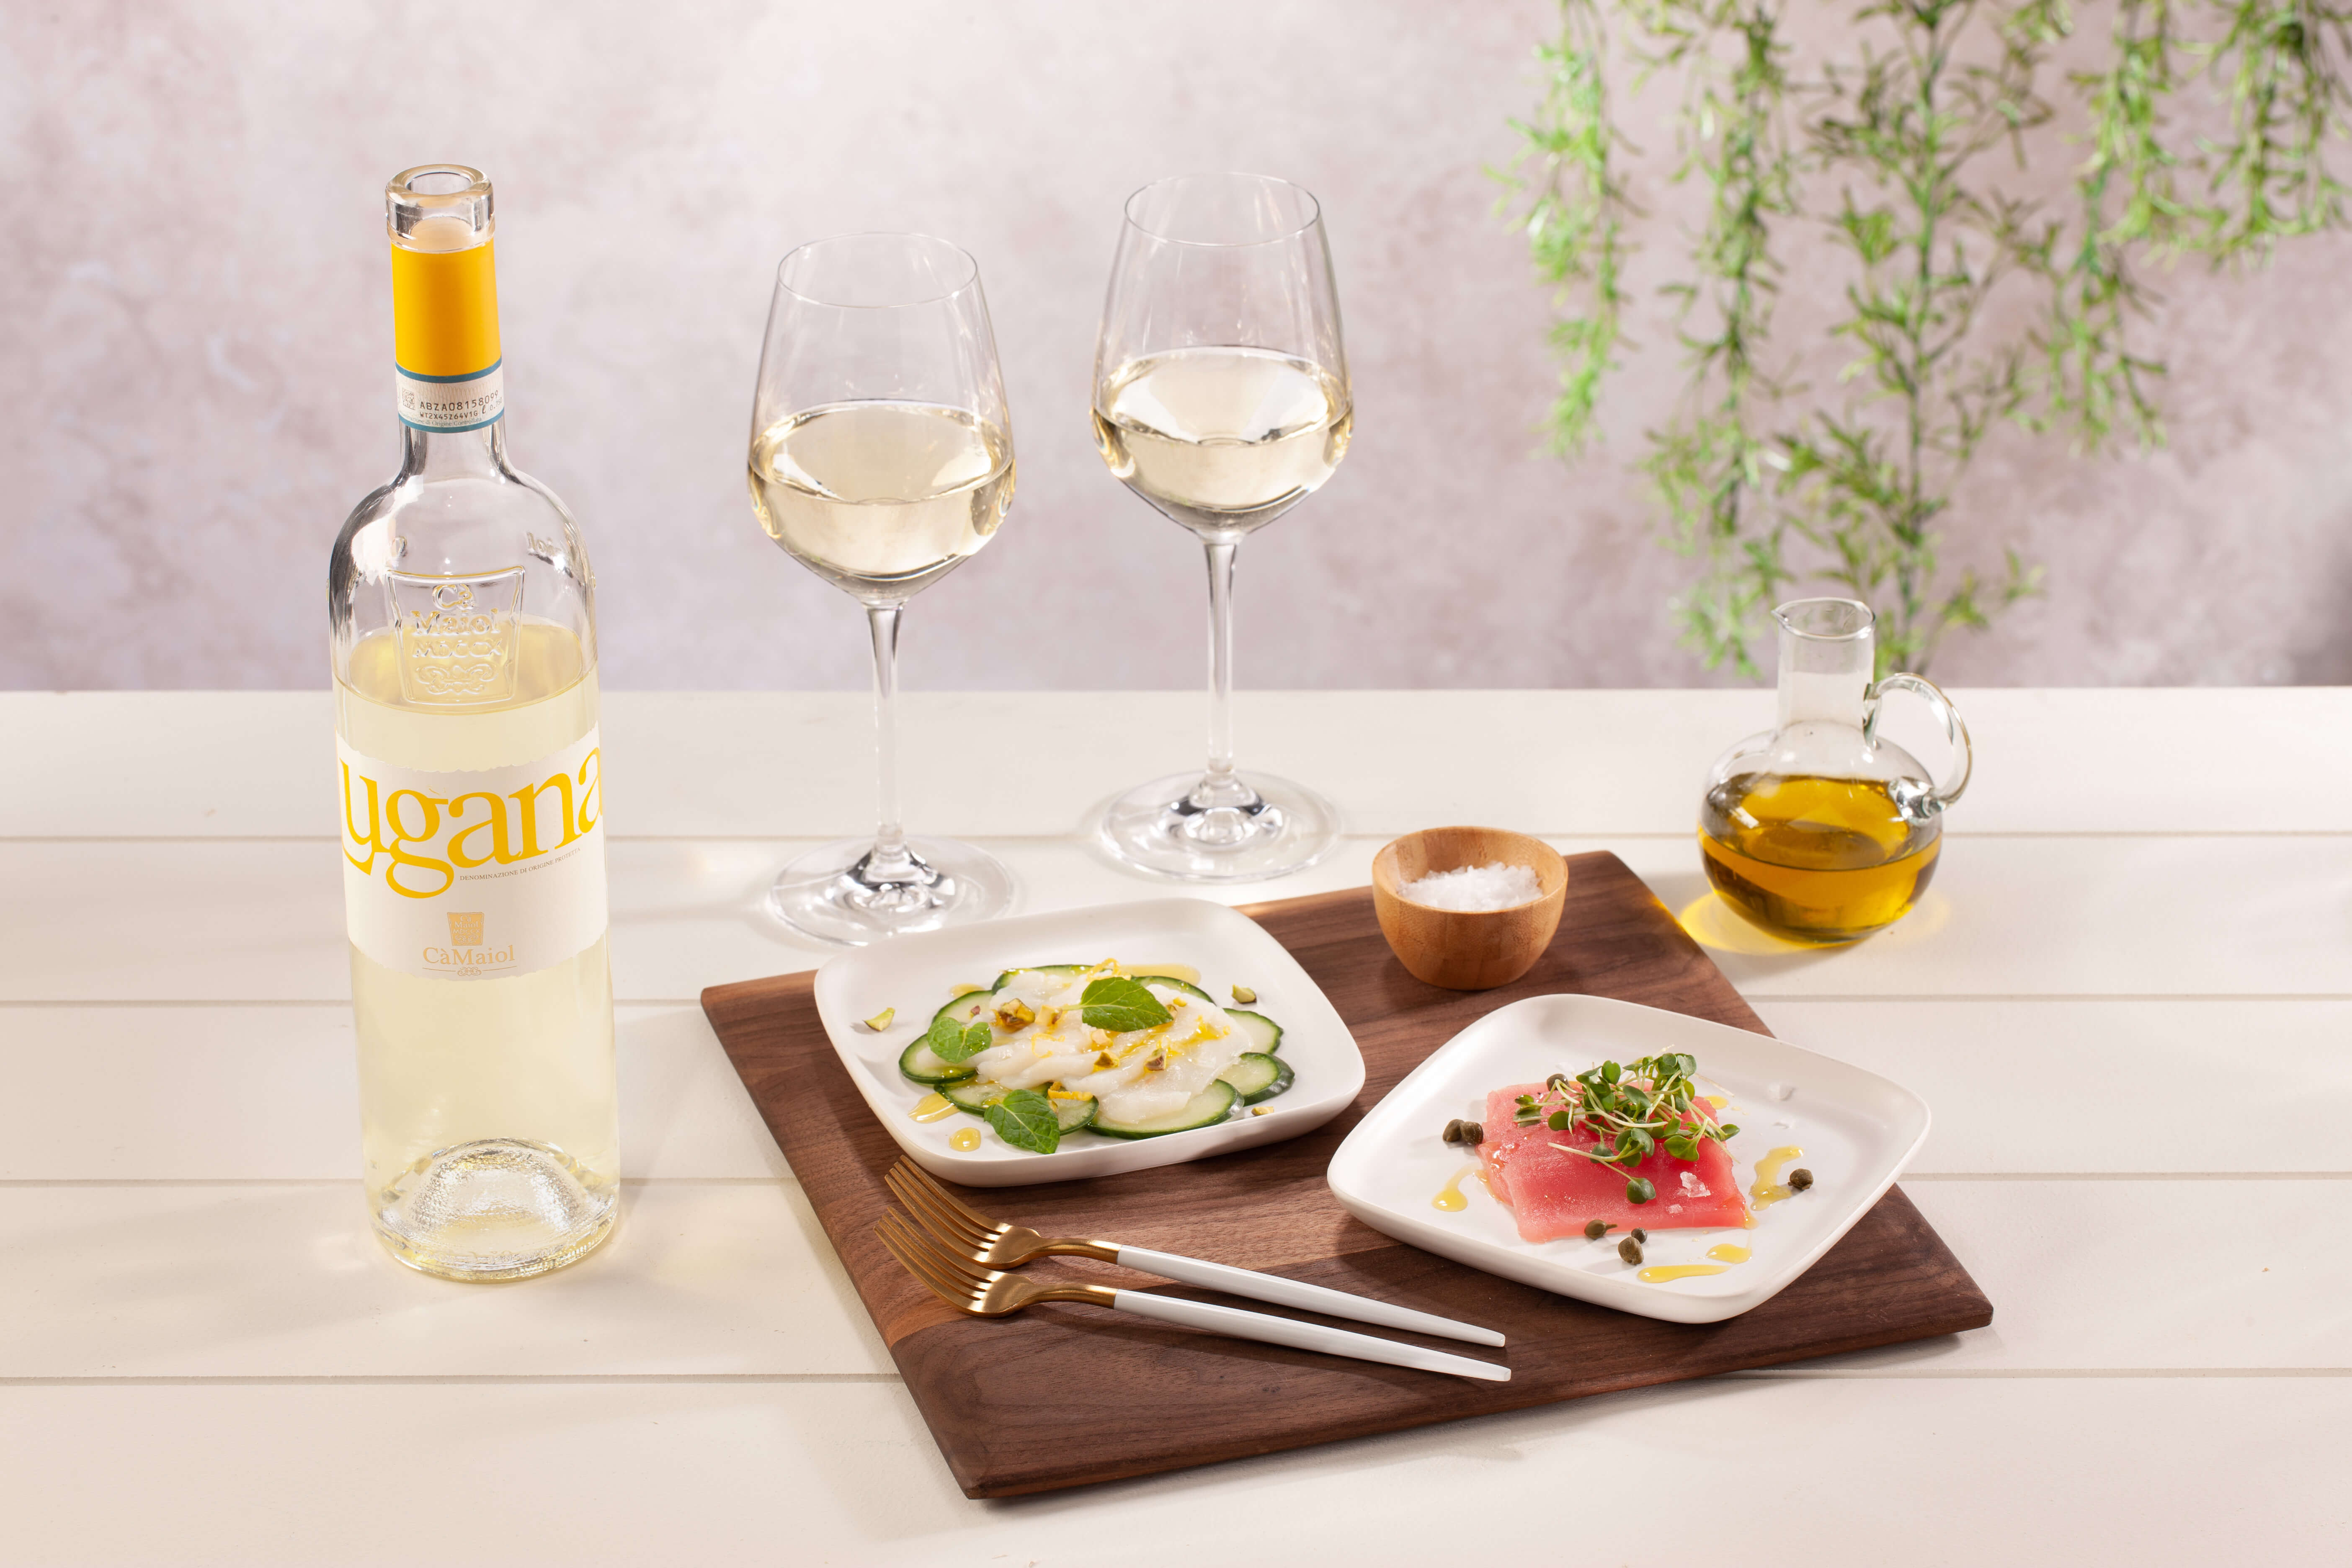 Recipes of a dish paired with a bottled of Camaiol wine